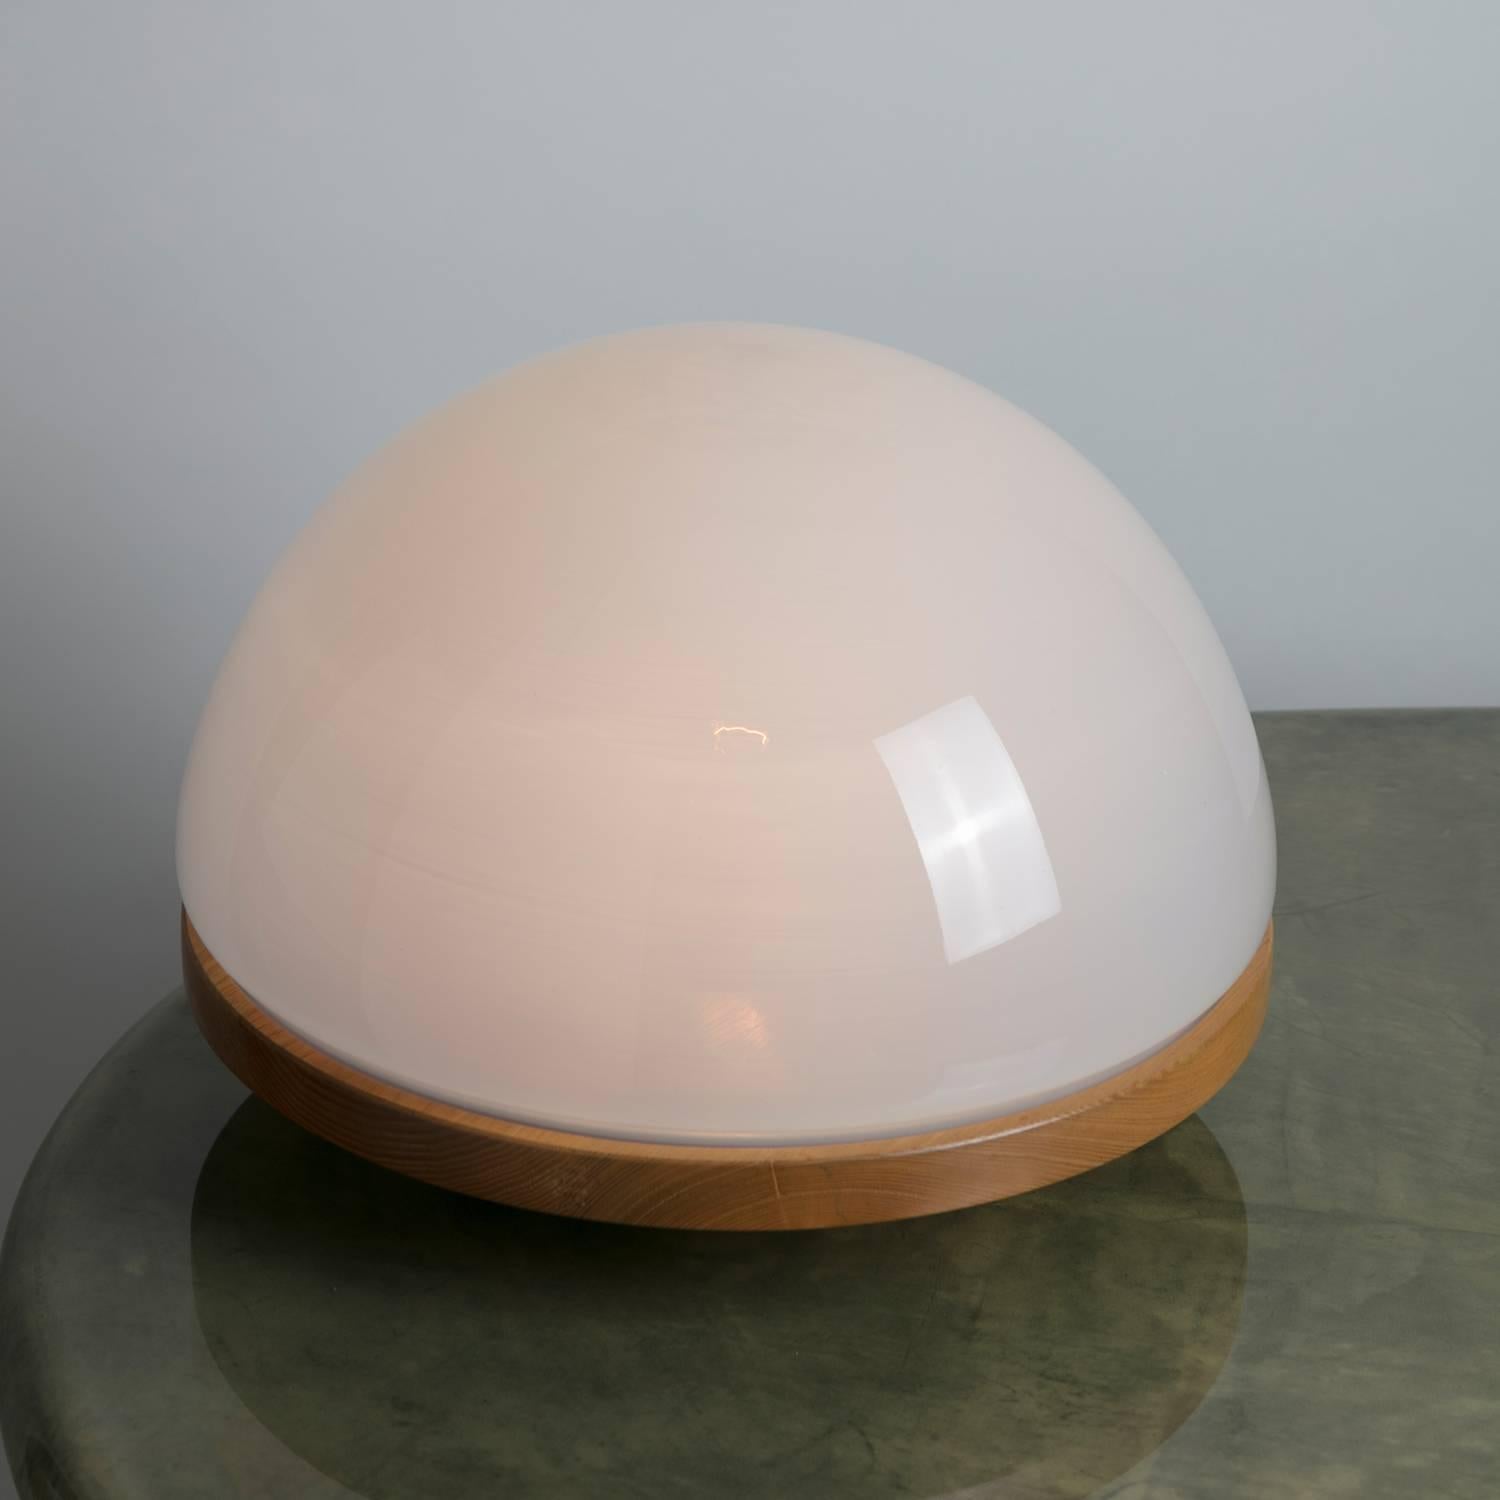 Remarkable table lamp by Selenova.
Wood base and large opaline glass diffuser.